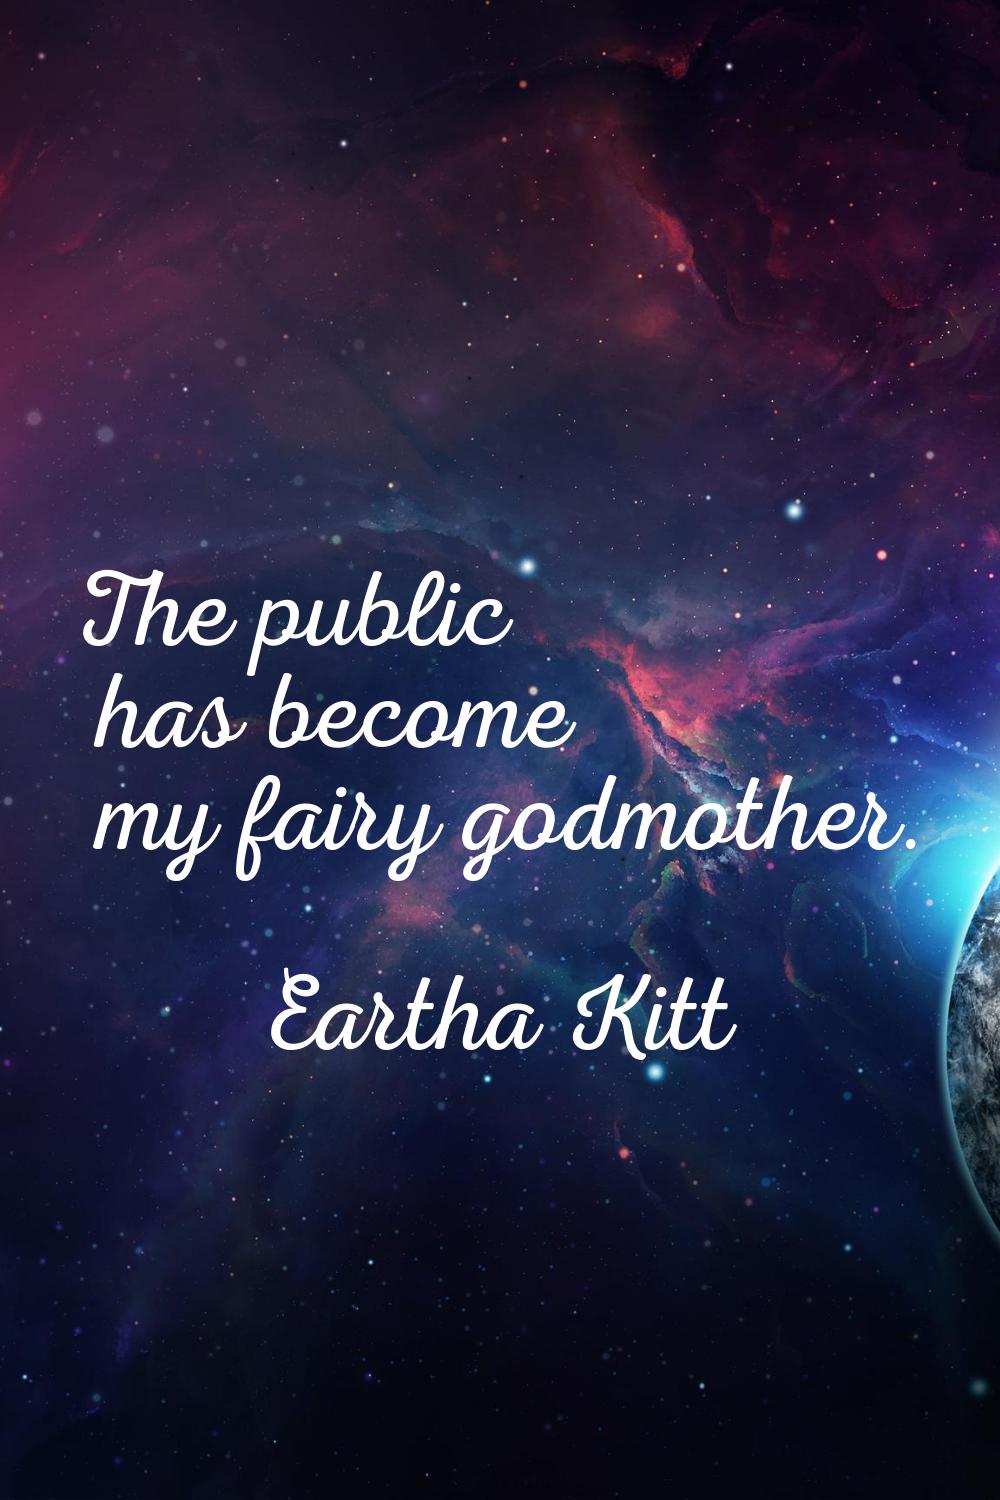 The public has become my fairy godmother.